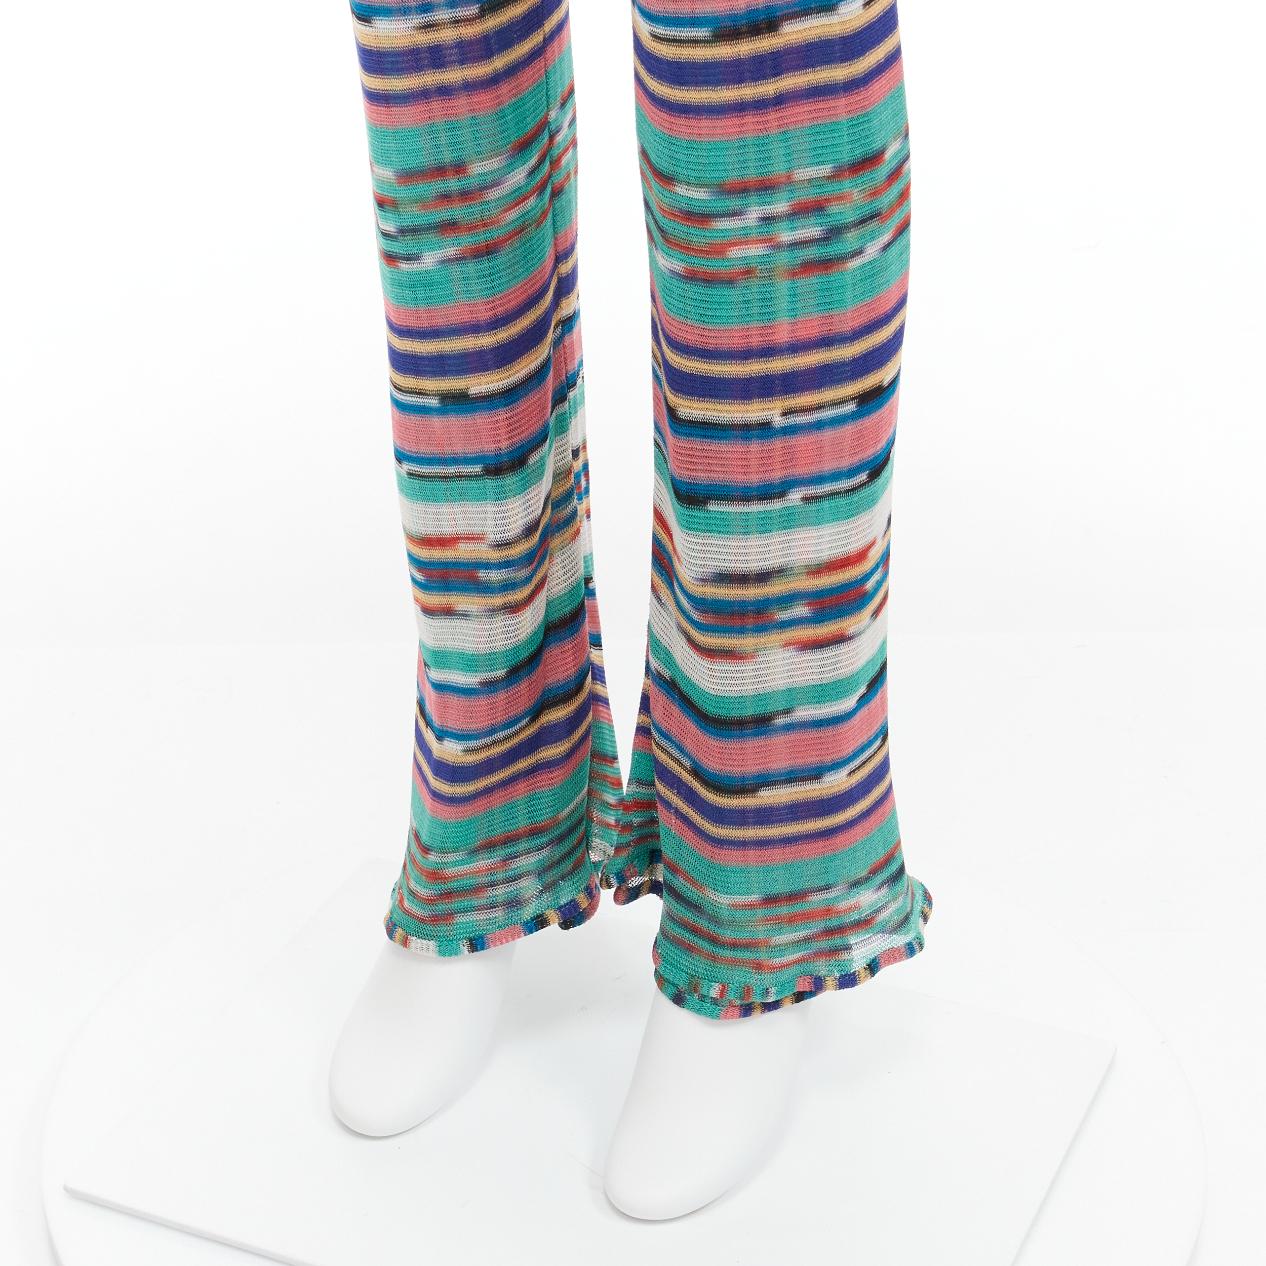 MISSONI Signature colorful psychedelic stripe high waisted double layer flared pants IT38 XS
Reference: TGAS/D00308
Brand: Missoni
Material: Rayon
Color: Multicolour
Pattern: Striped
Closure: Elasticated
Extra Details: Double layer fabric flatter